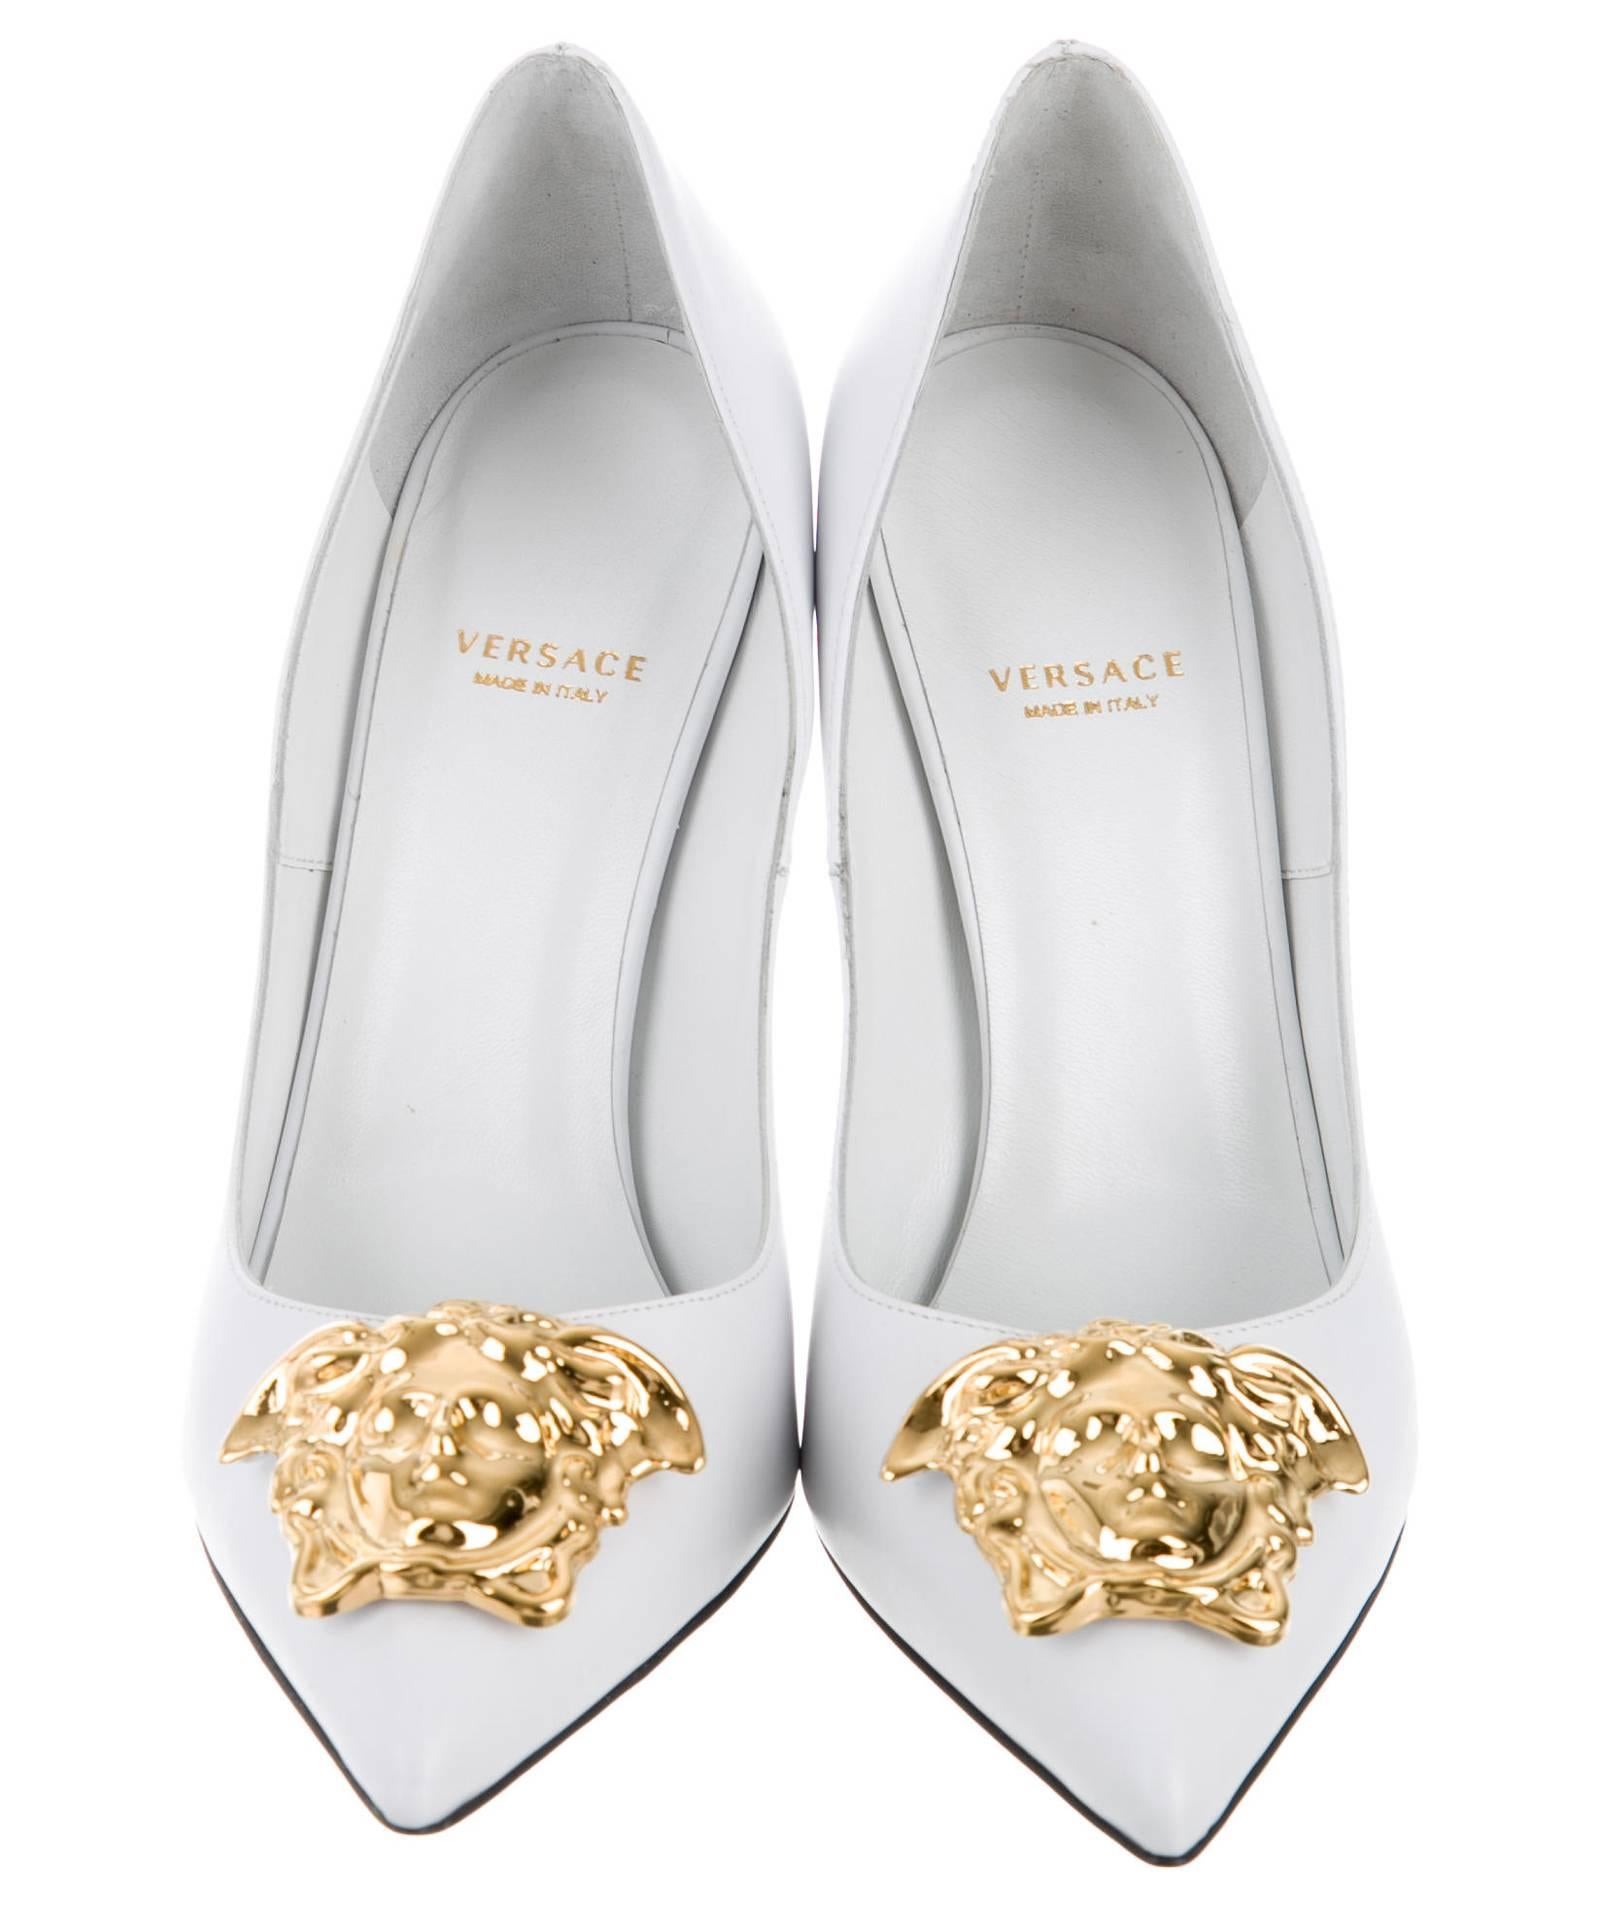 White leather Medusa pumps from Versace featuring a pointed toe, a branded insole and a gold-tone high stiletto heel.
Gold-tone Medusa embellishment at tops.
Italian Size - 38.5
Heel - 4.5 inches (11.5 cm).
Lining Composition:  Leather 100%
Outer